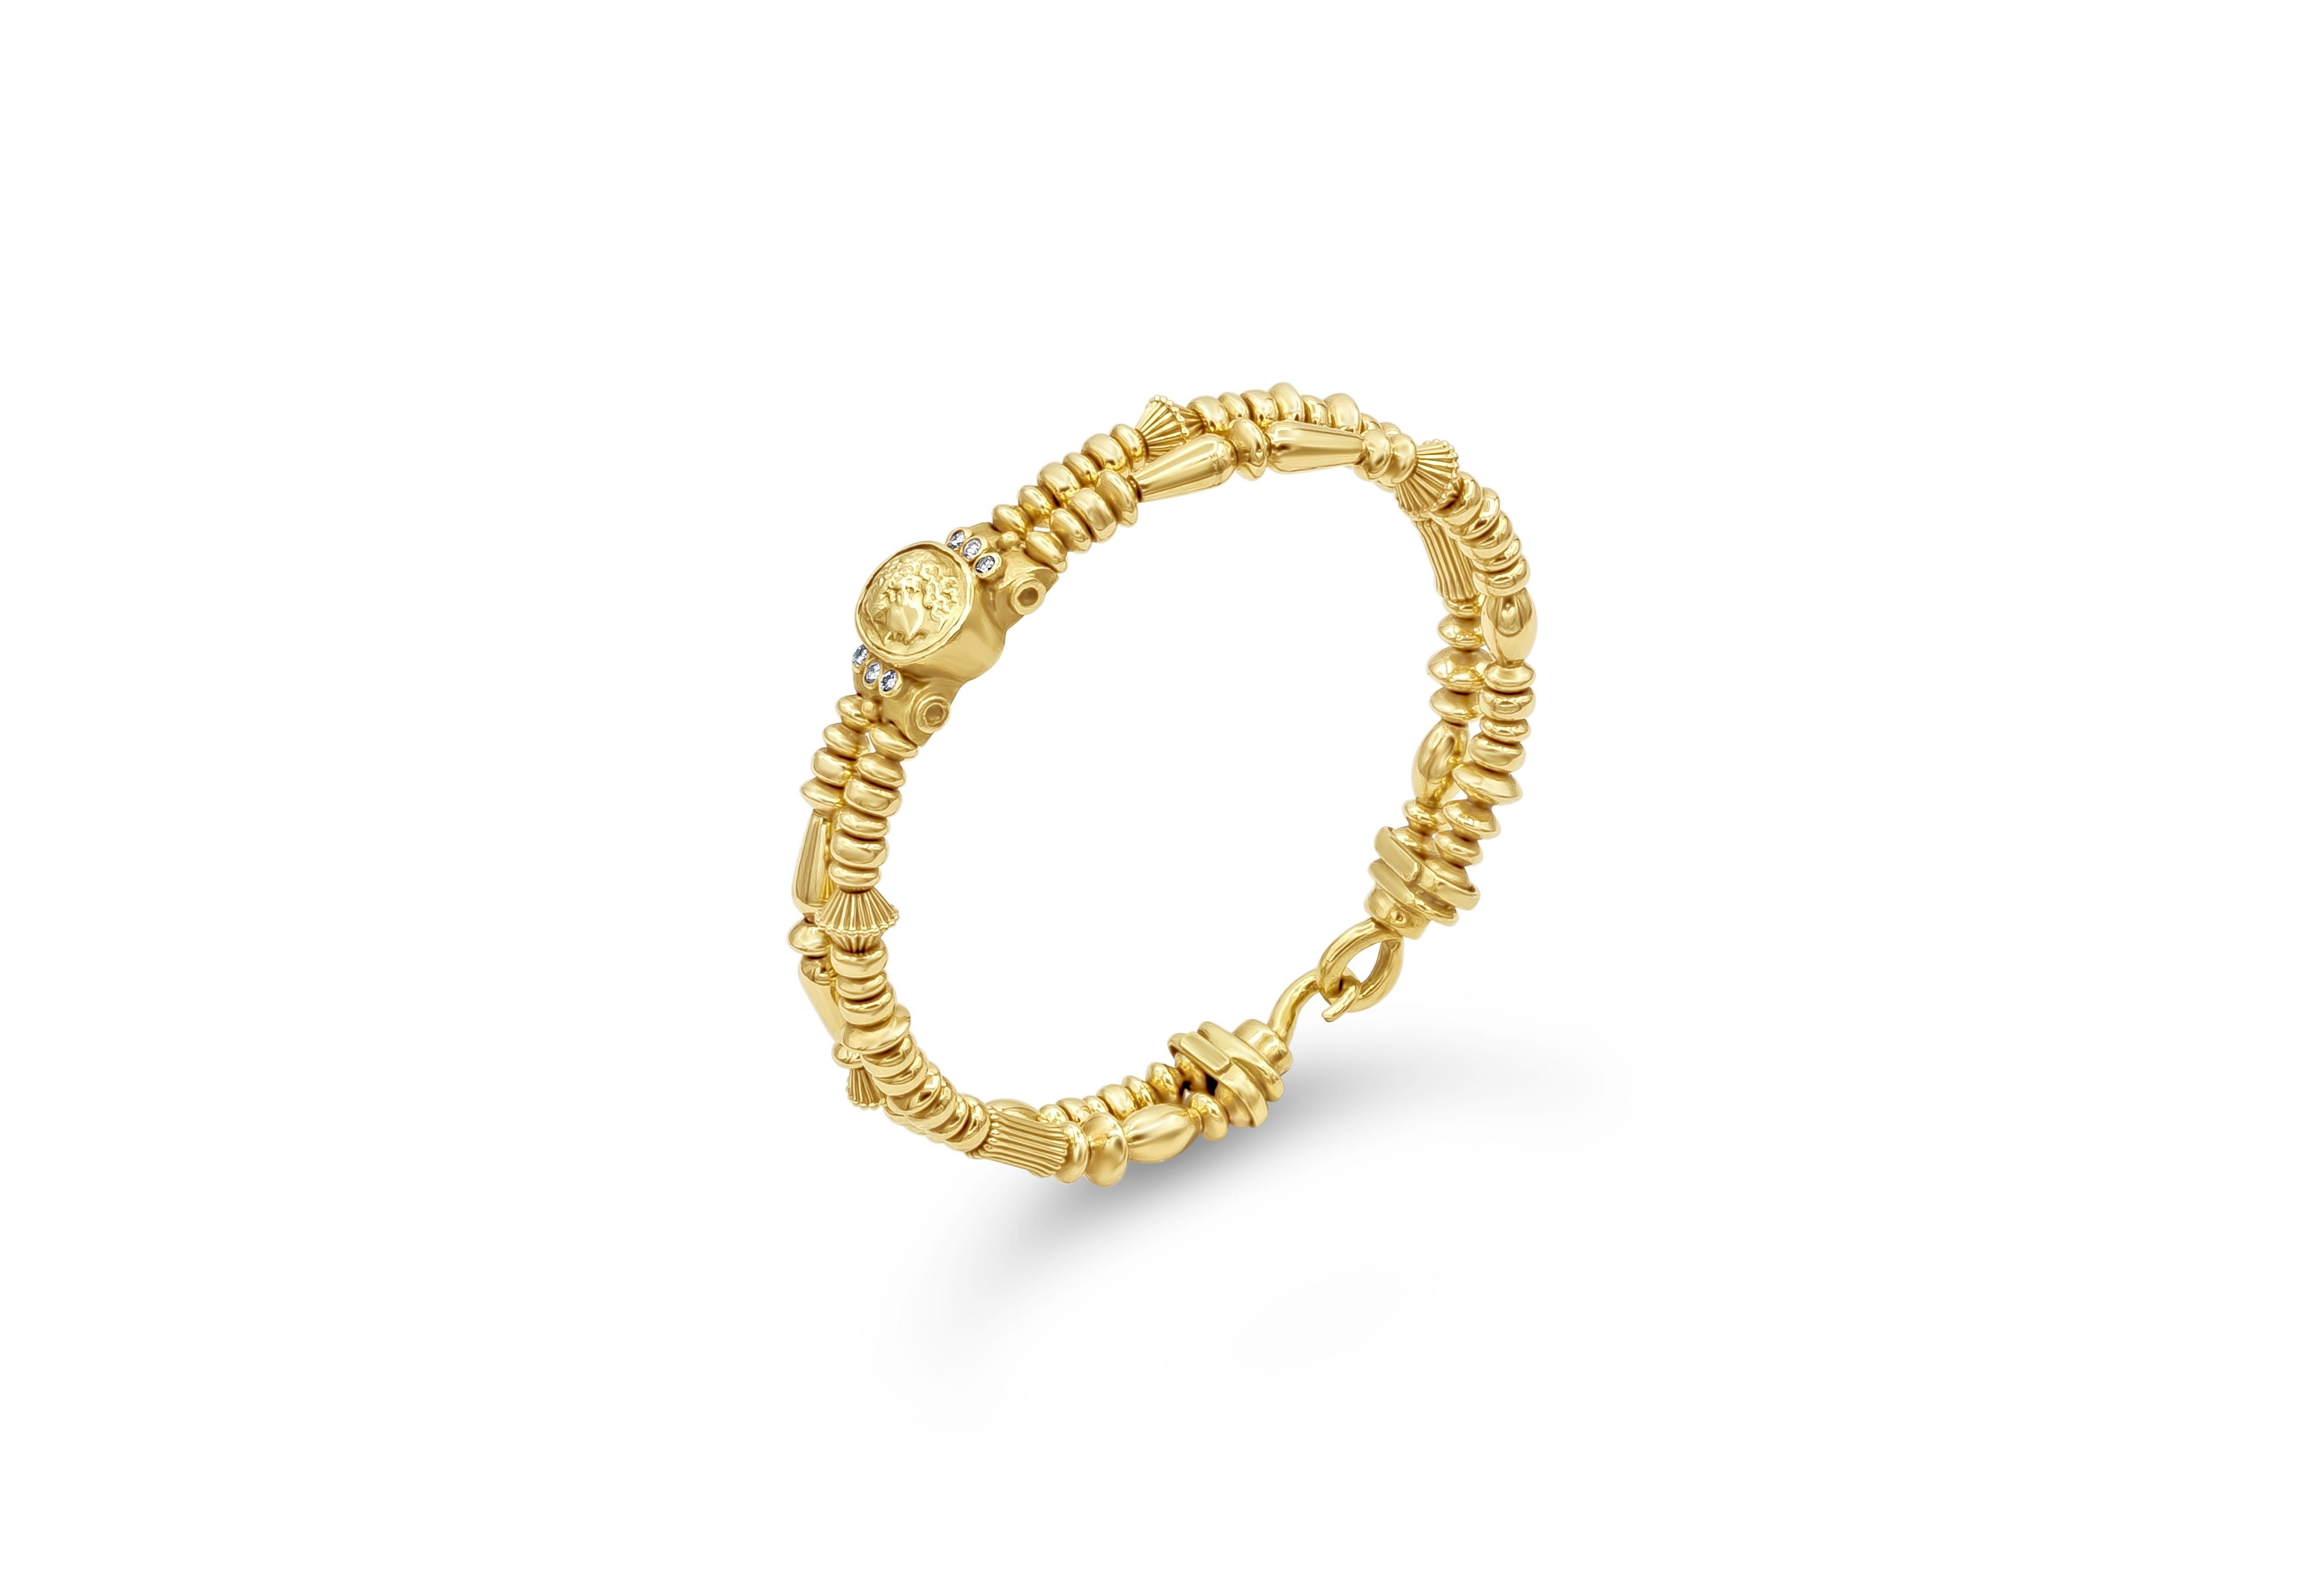 A unique and beautiful bracelet showcasing a side profile of a Roman man made in 18K Yellow Gold, accented by diamonds on either side. Diamonds weigh 0.12 carats total. Double row design made in 18K Yellow Gold. Signed by Seidengang.